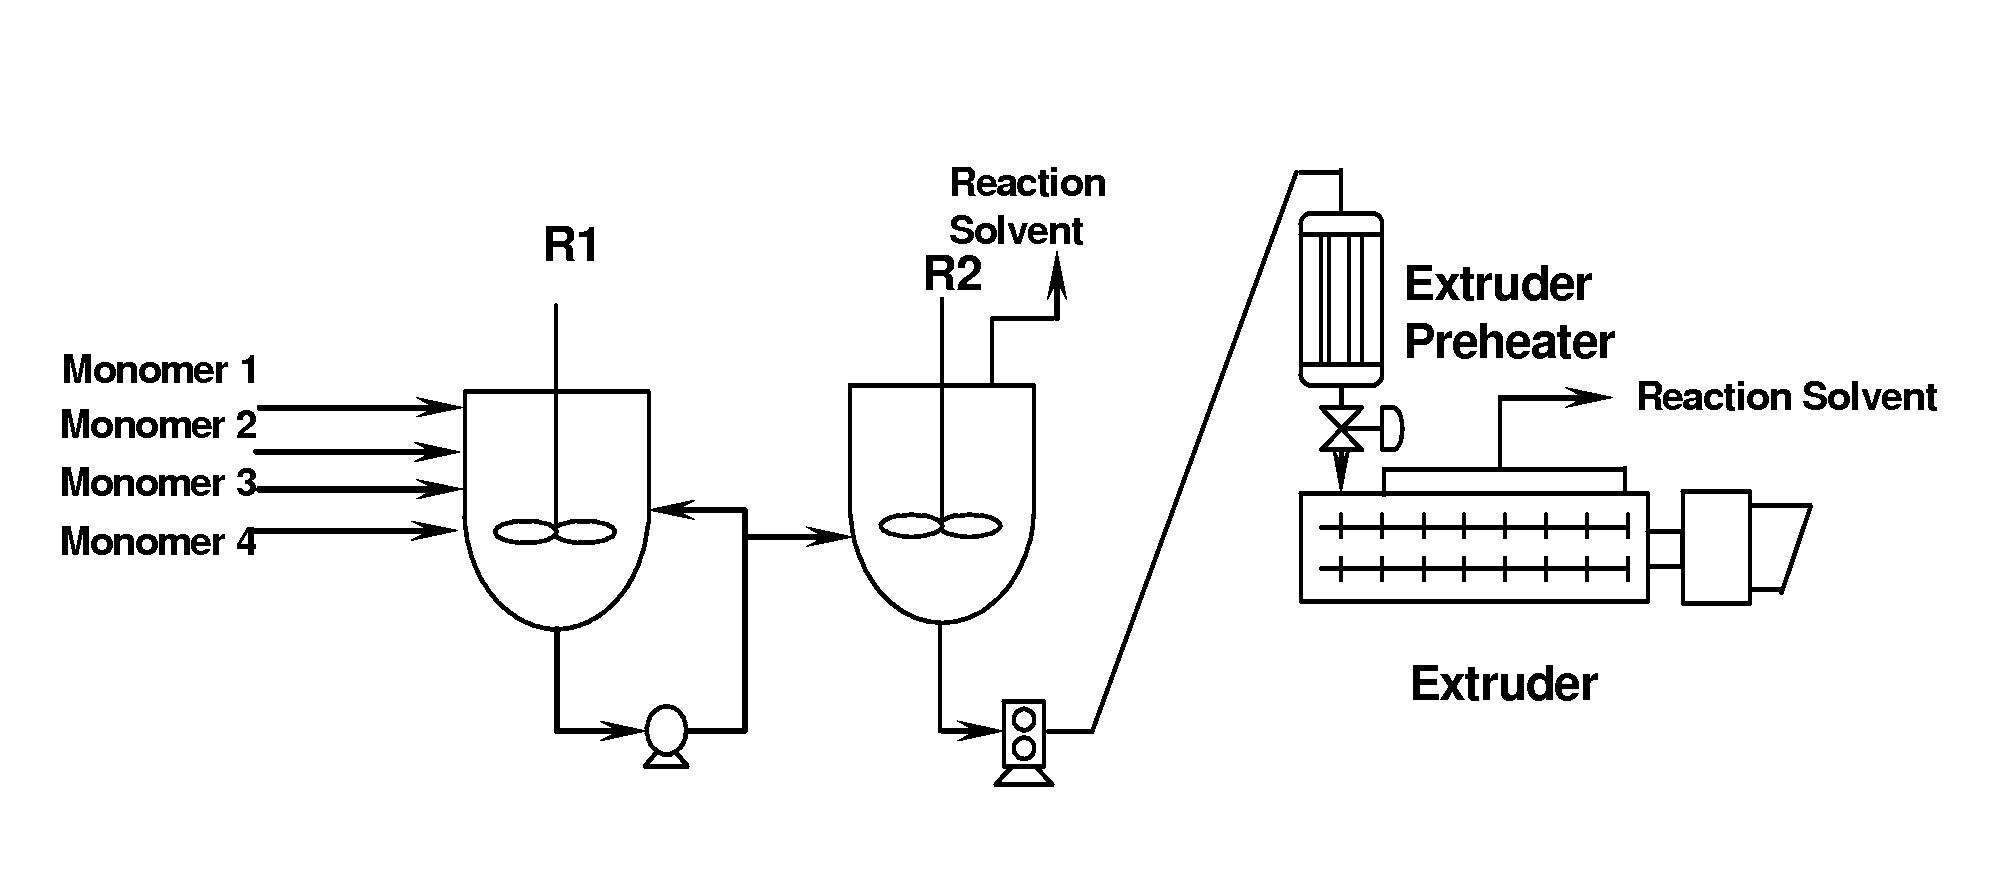 Process for the production of polycarbonate using an ester substituted diaryl carbonate